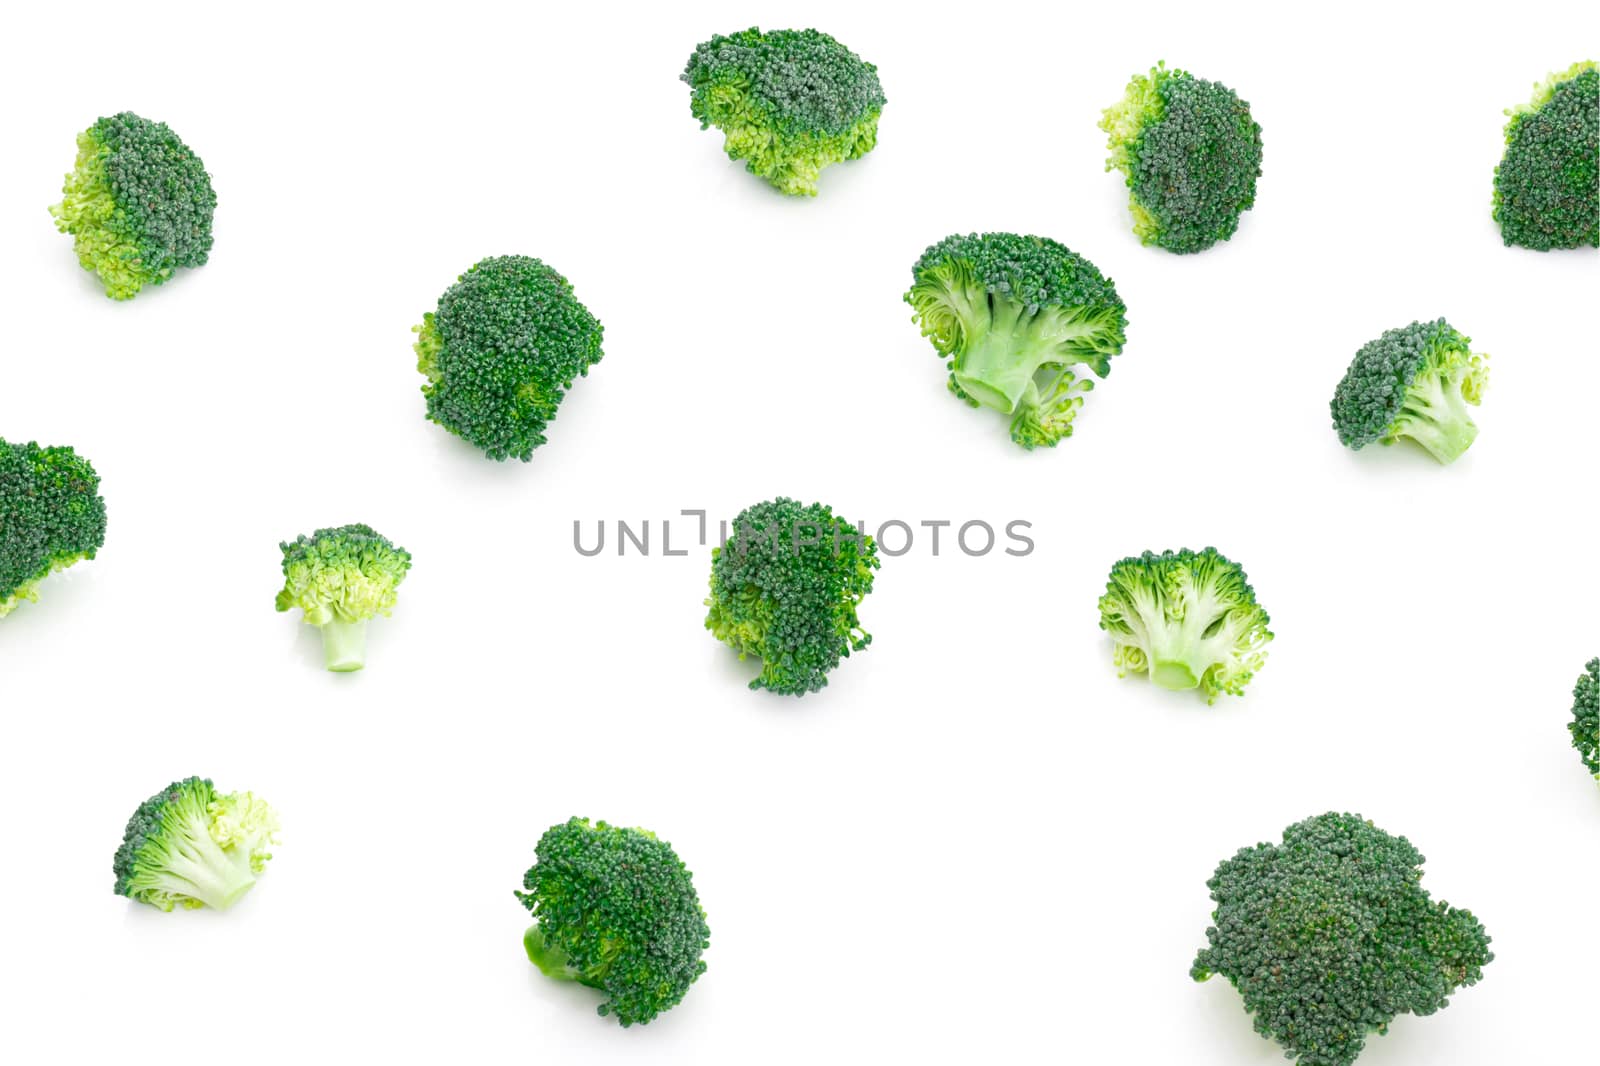 Broccoli vegetable on a white background by sompongtom